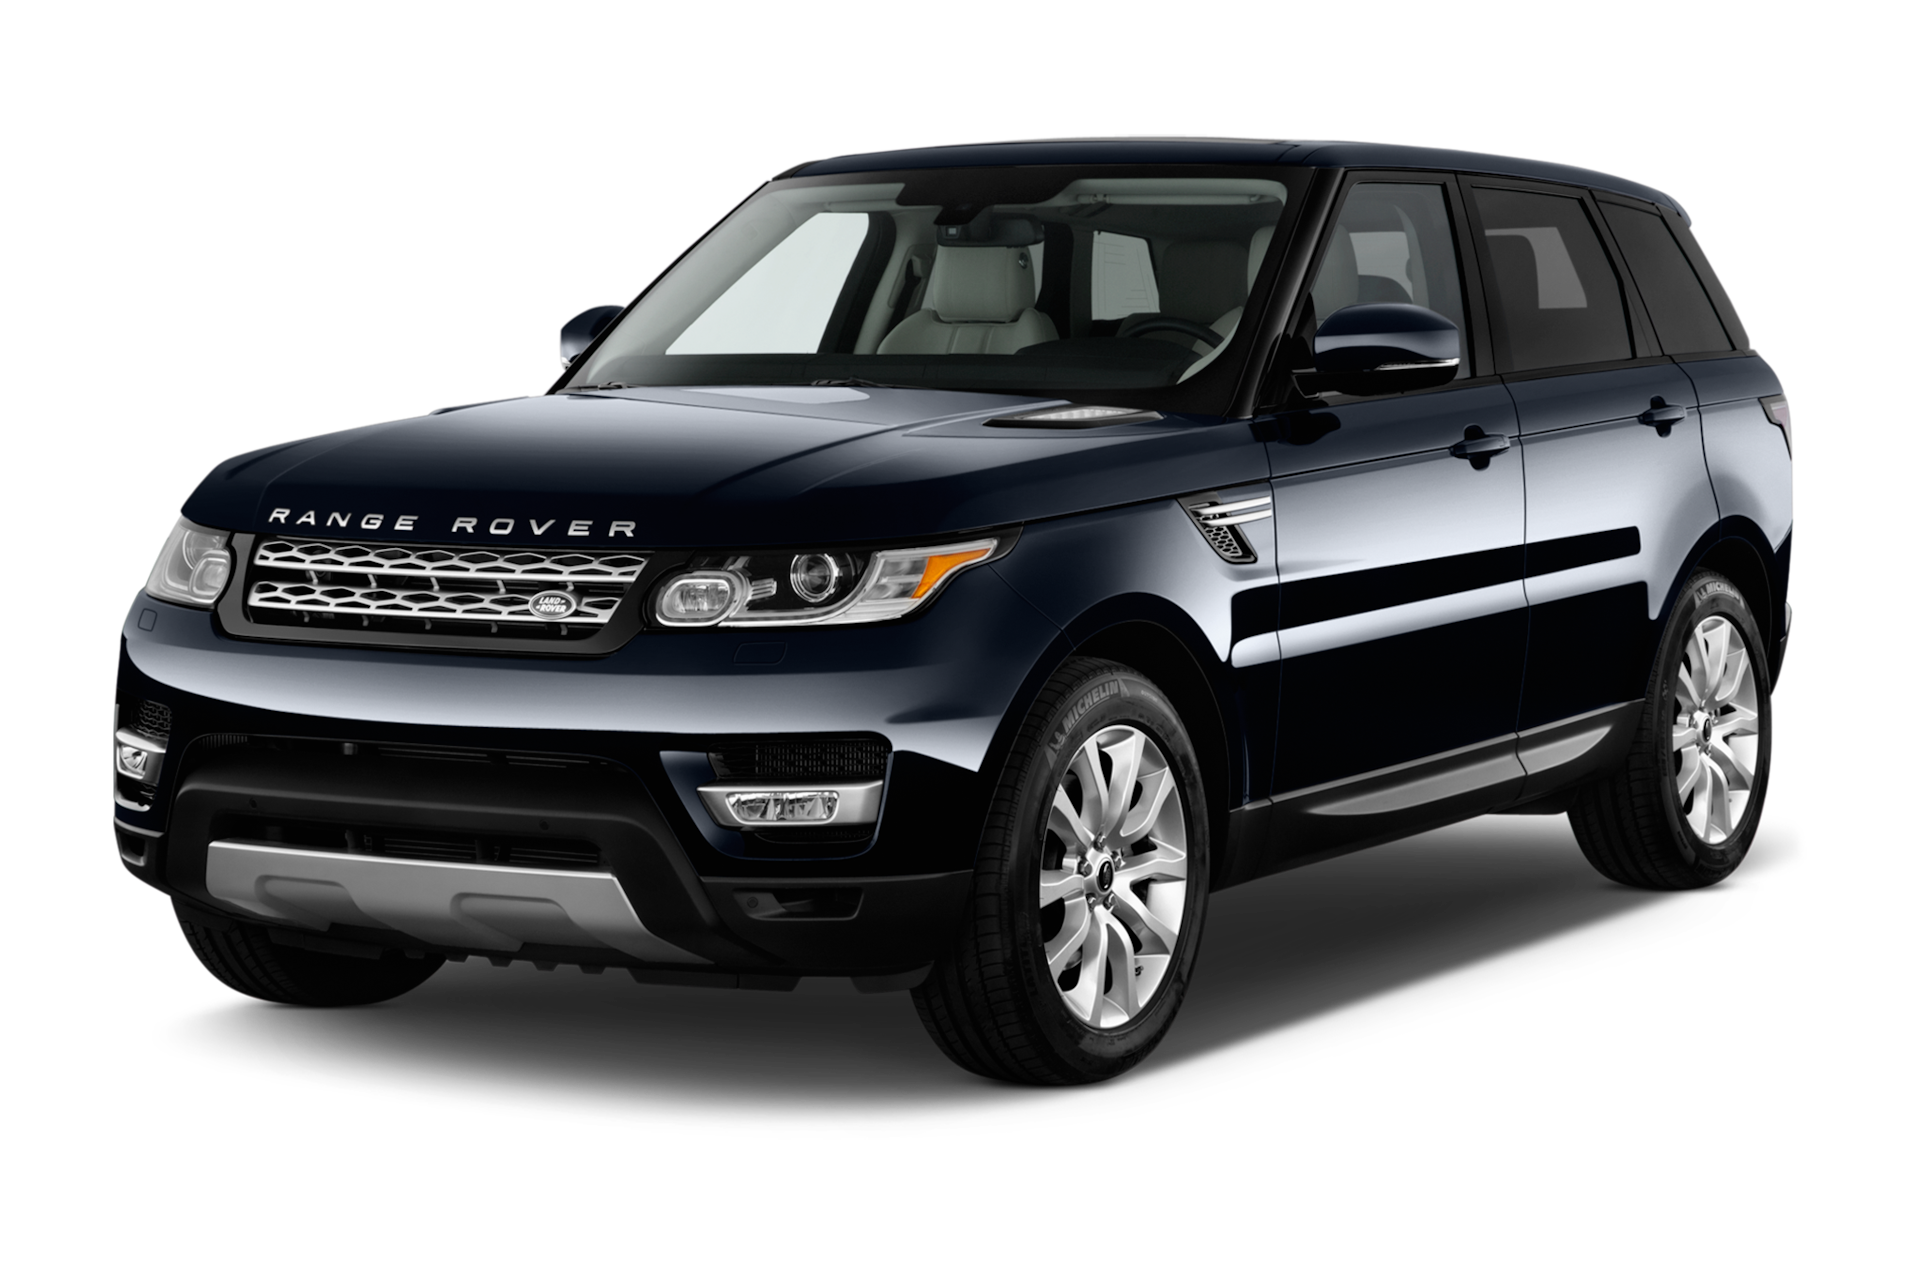 2017 Land Rover Range Rover Sport Prices, Reviews, and Photos - MotorTrend